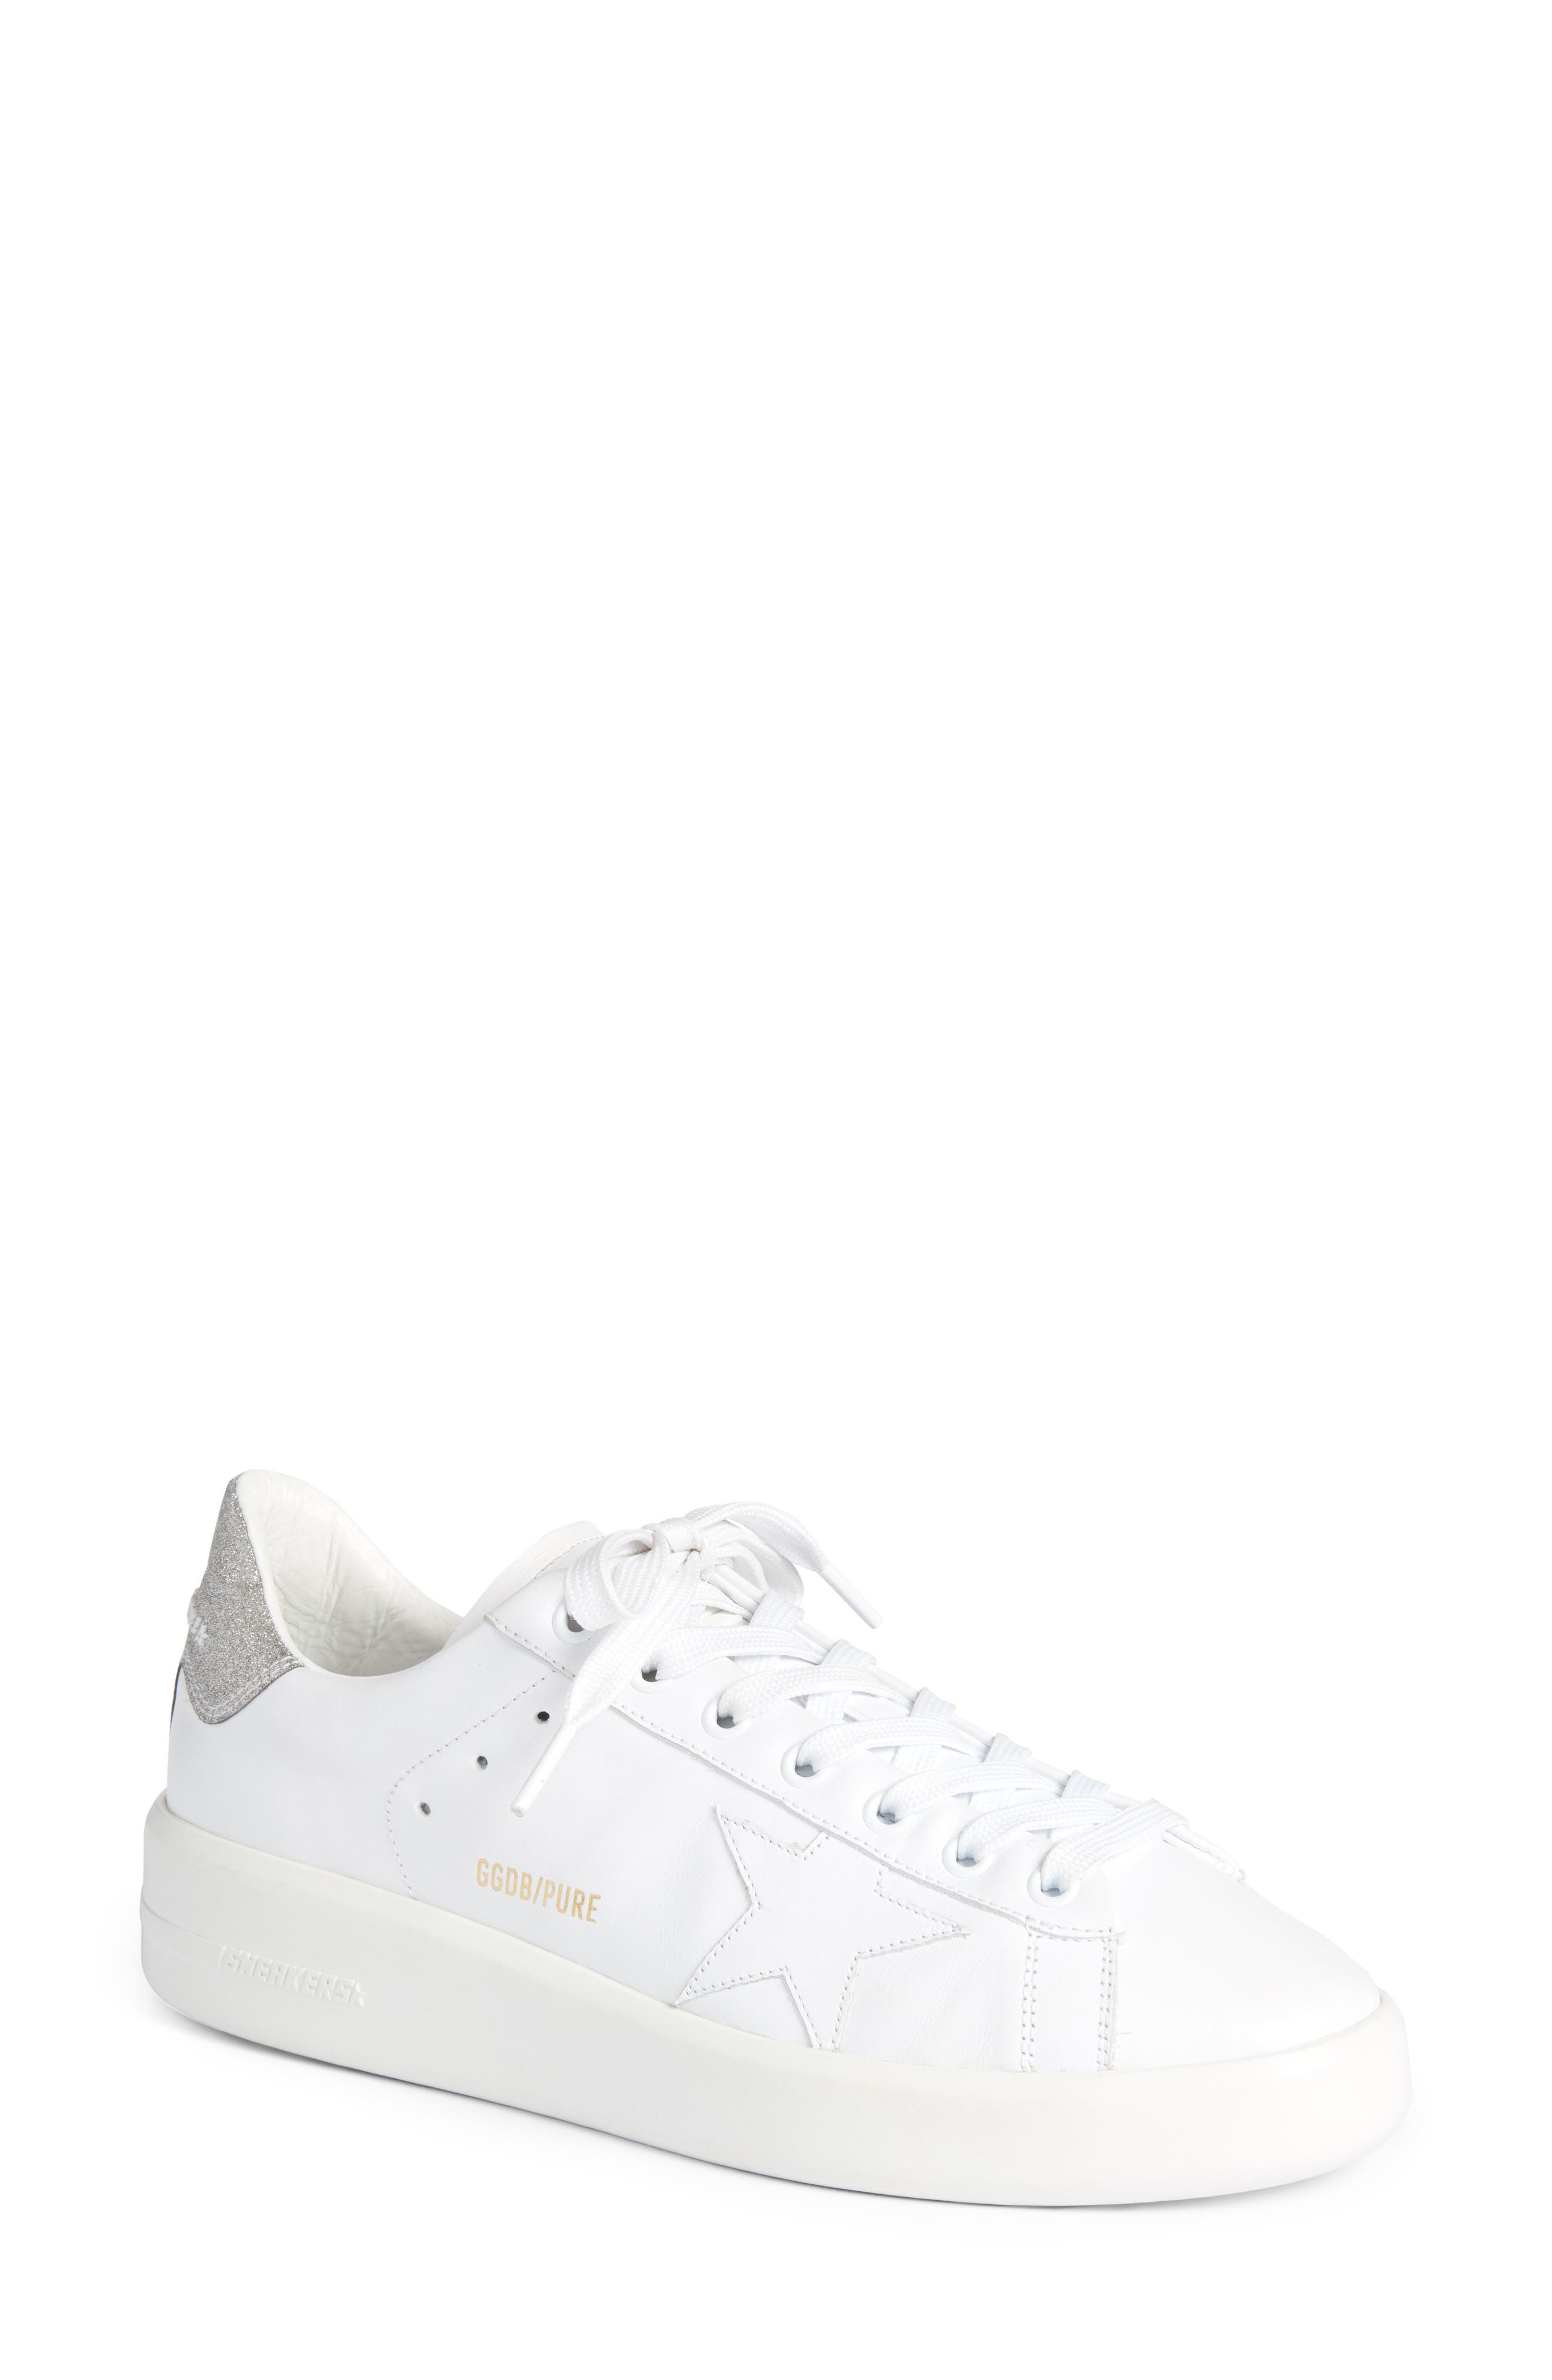 nordstrom chunky sneakers